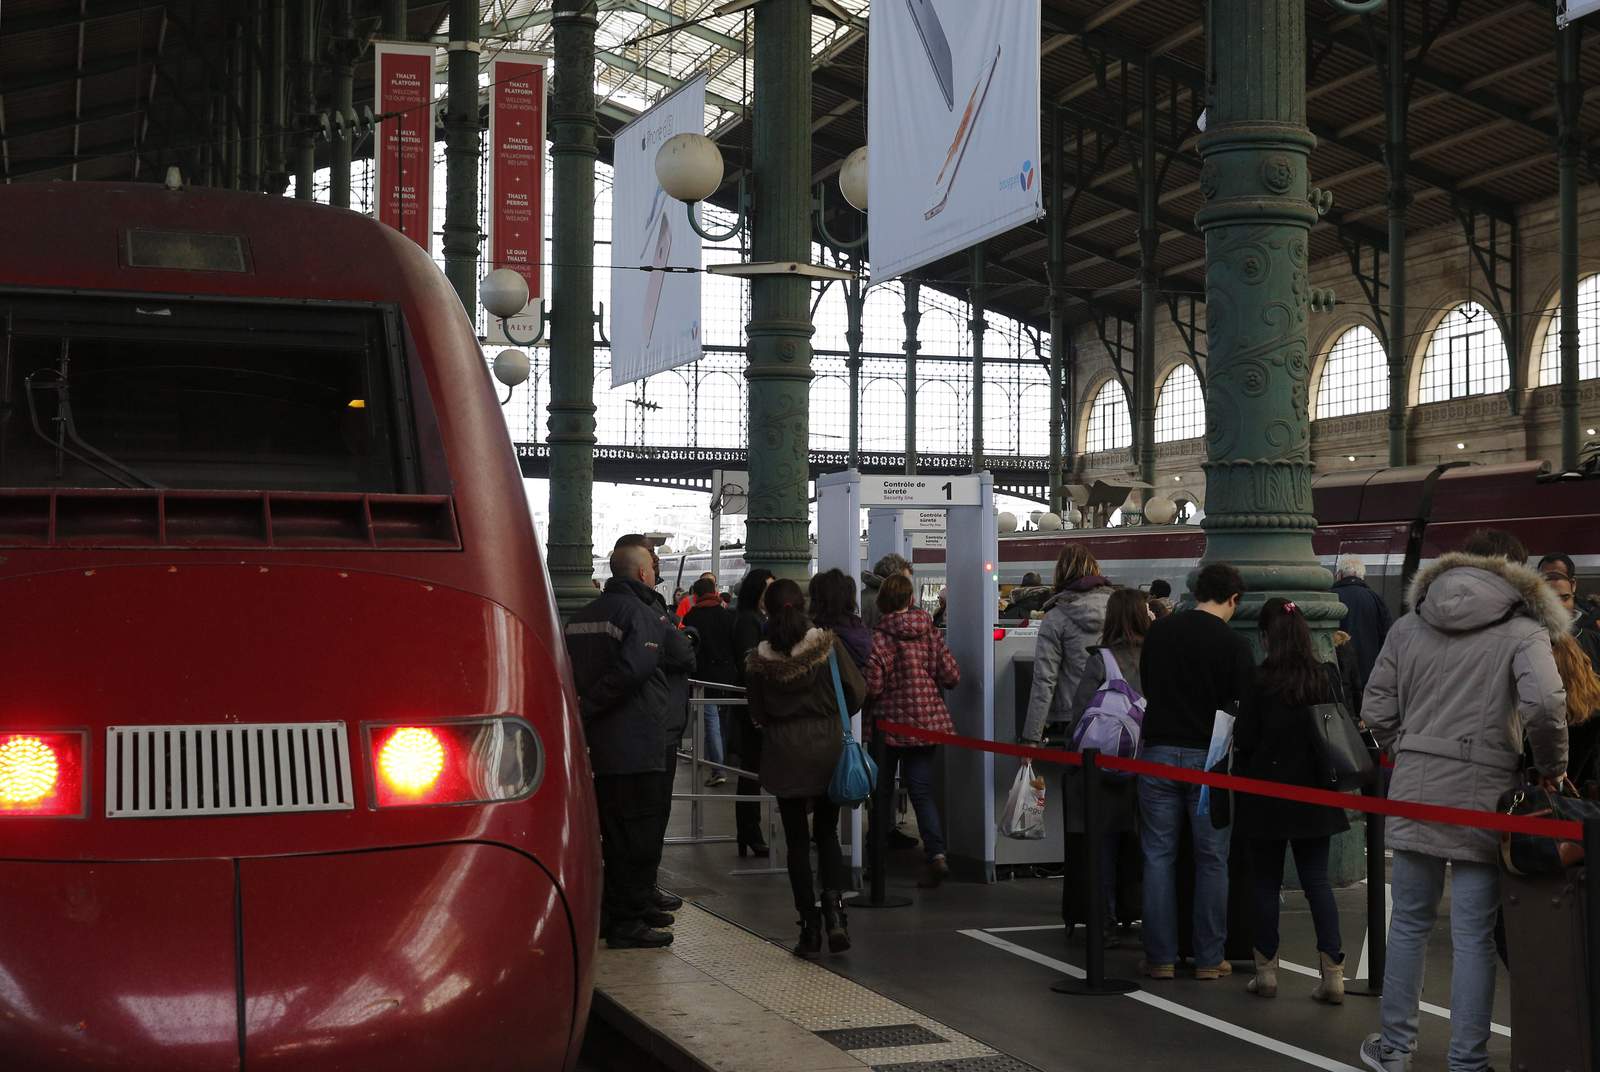 Trial in France for extremist foiled by 3 Americans on train